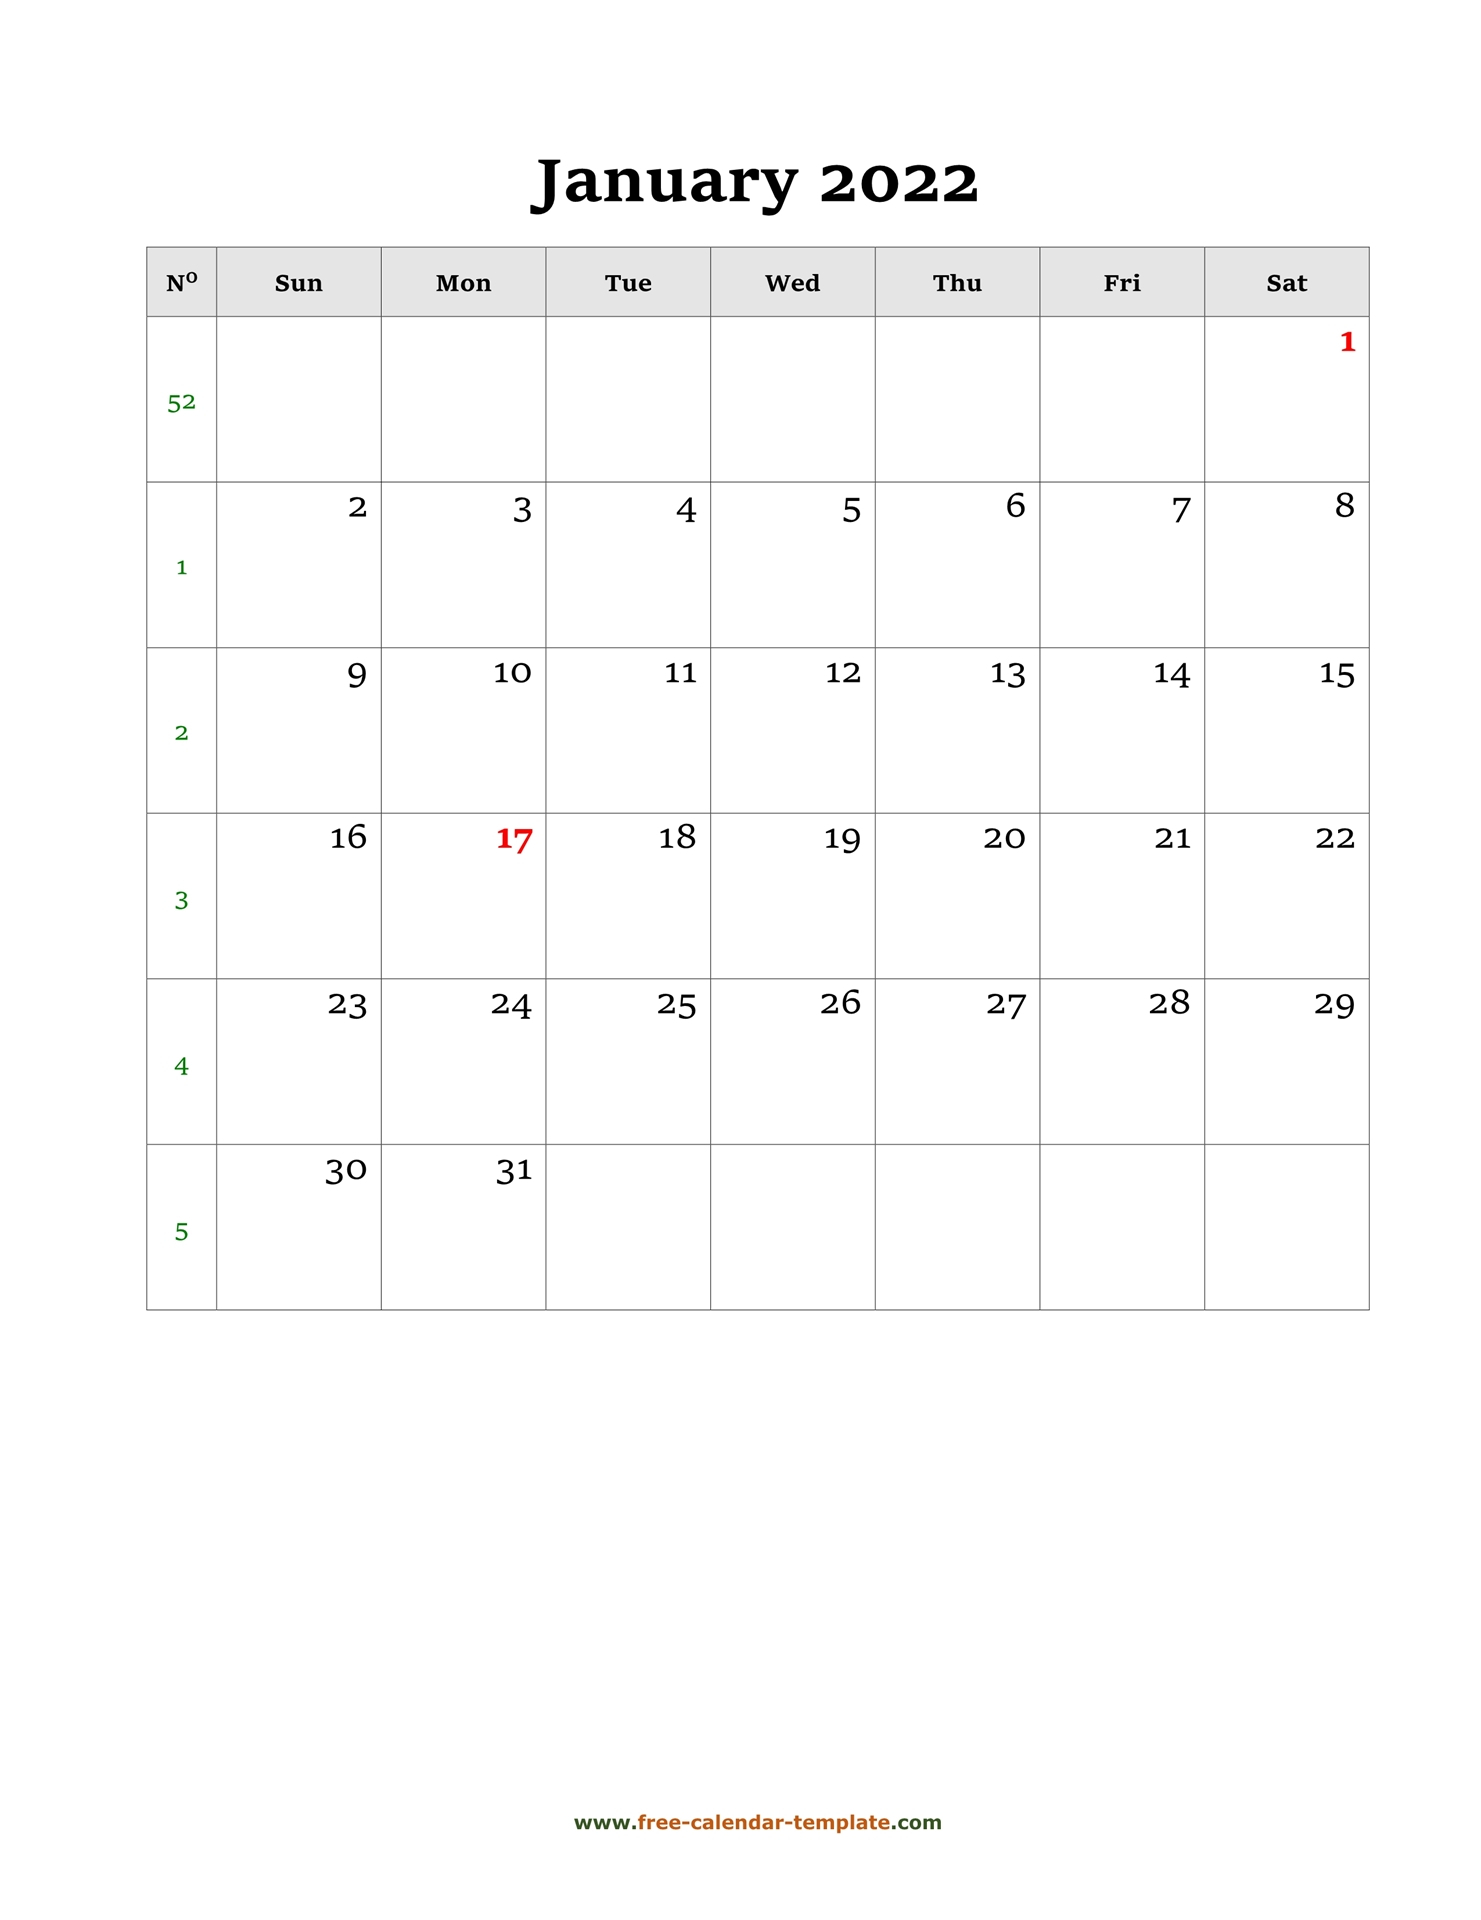 Collect Monthly Calendar For January 2022